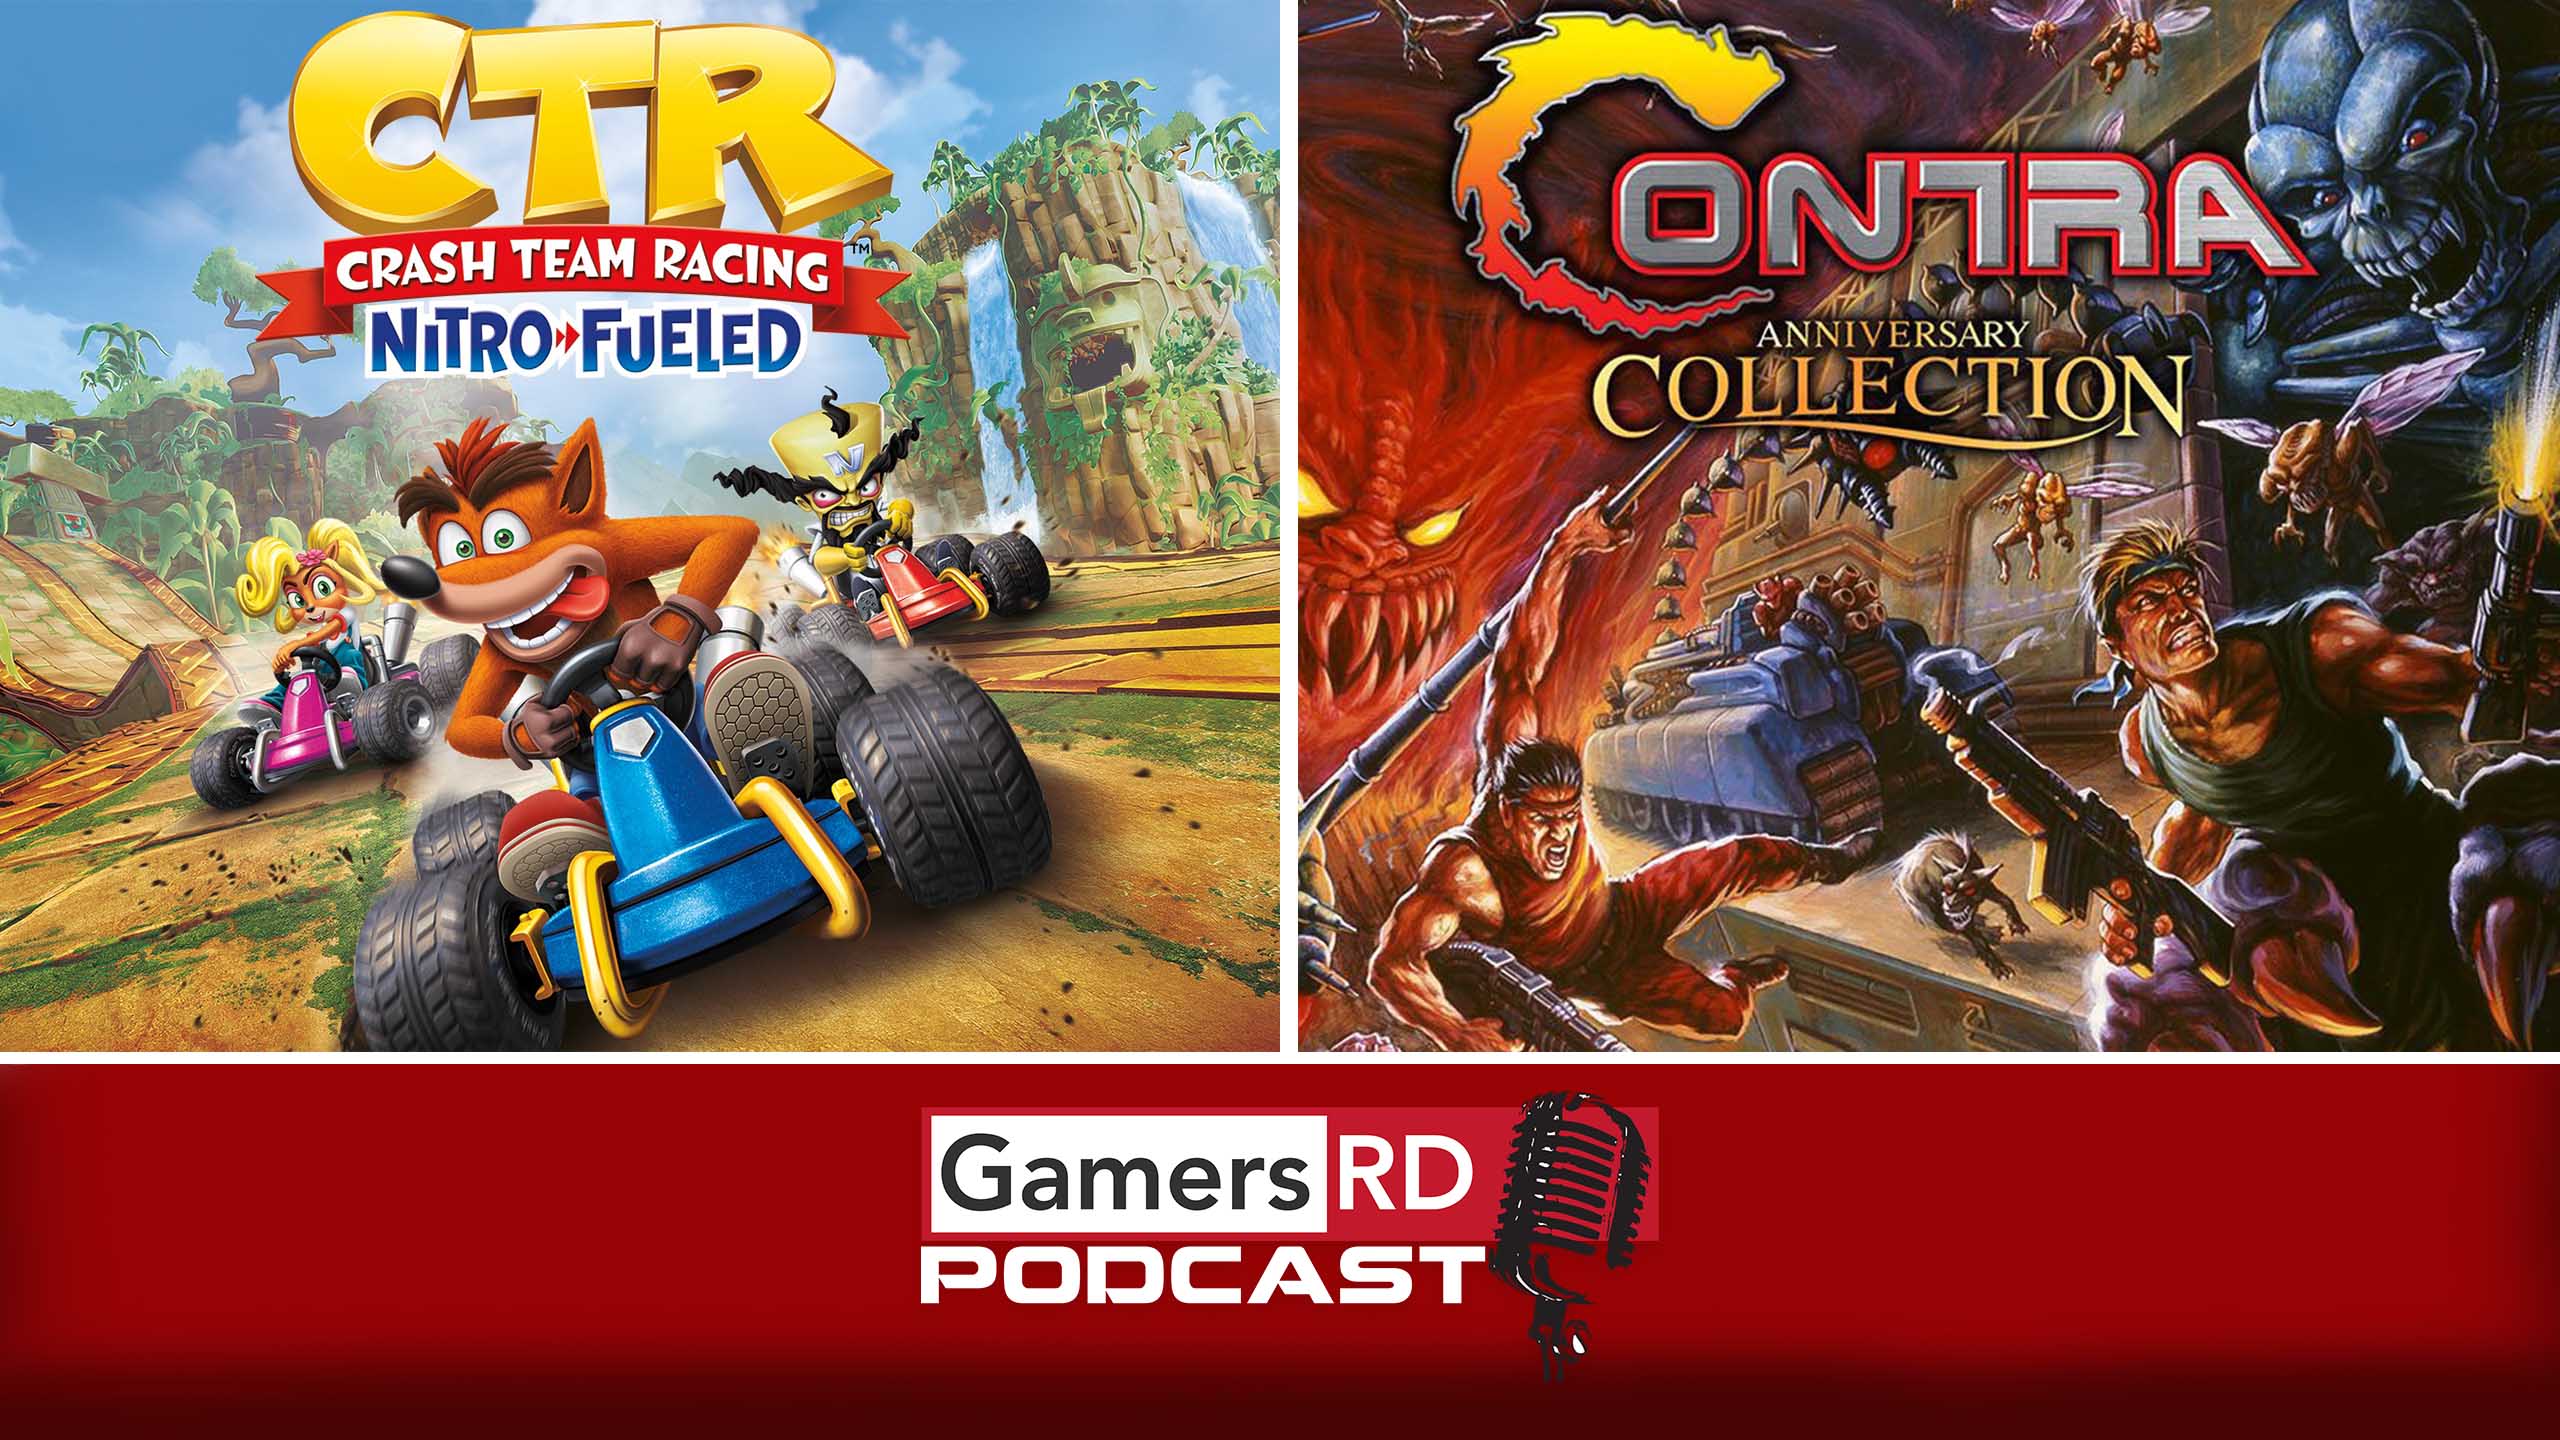 GamersRD #81 Review de Crash Team Racing Nitro-Fueled,Contra Anniversary Collection